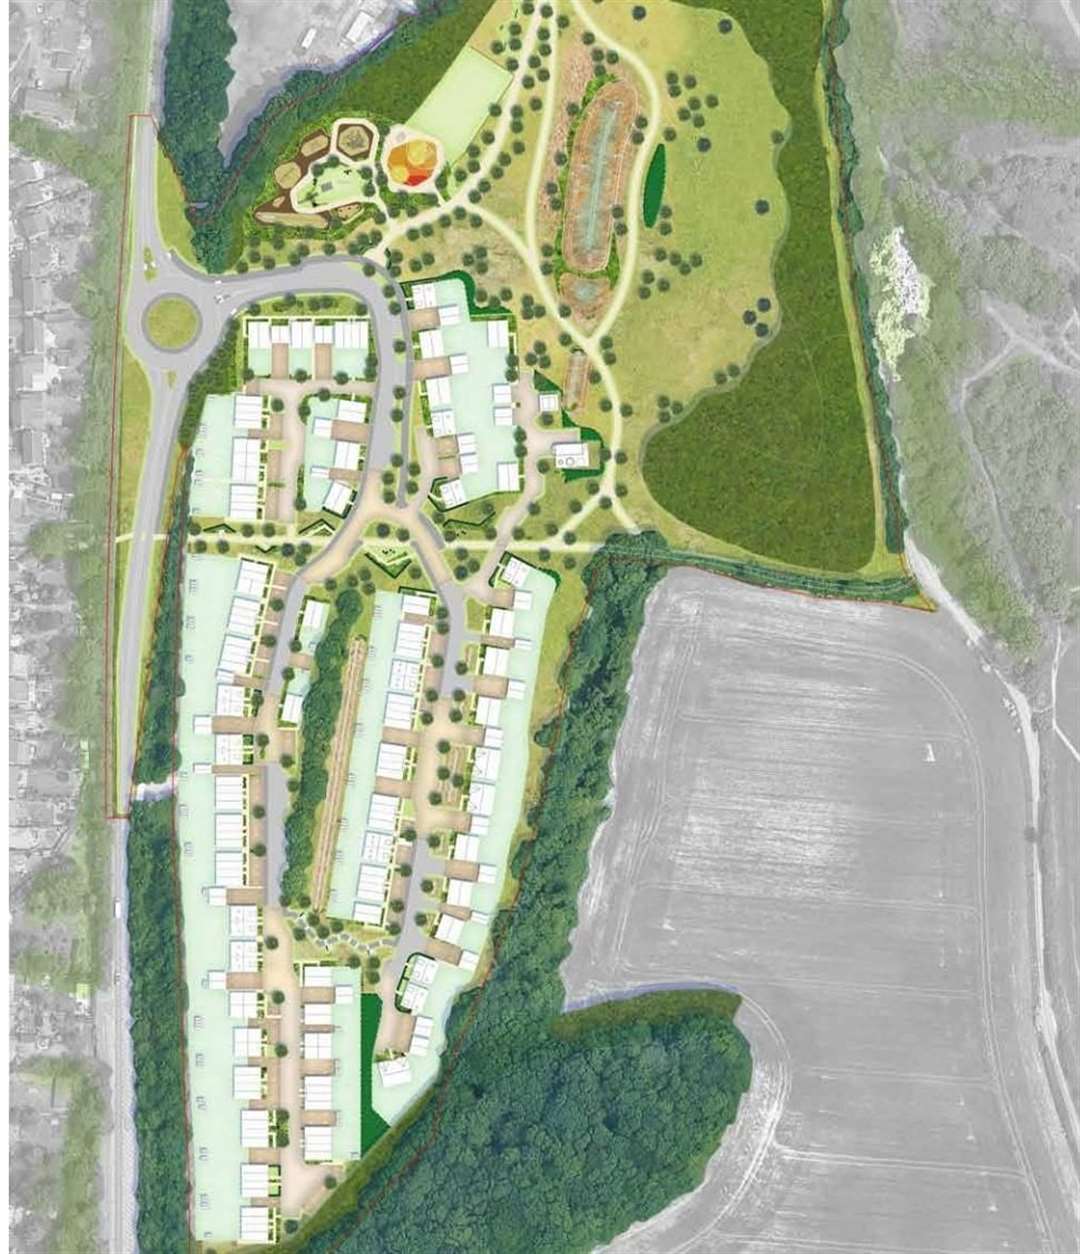 An artist's impression of the first phase of 91 homes planned for land along North Dane Way, Lordswood